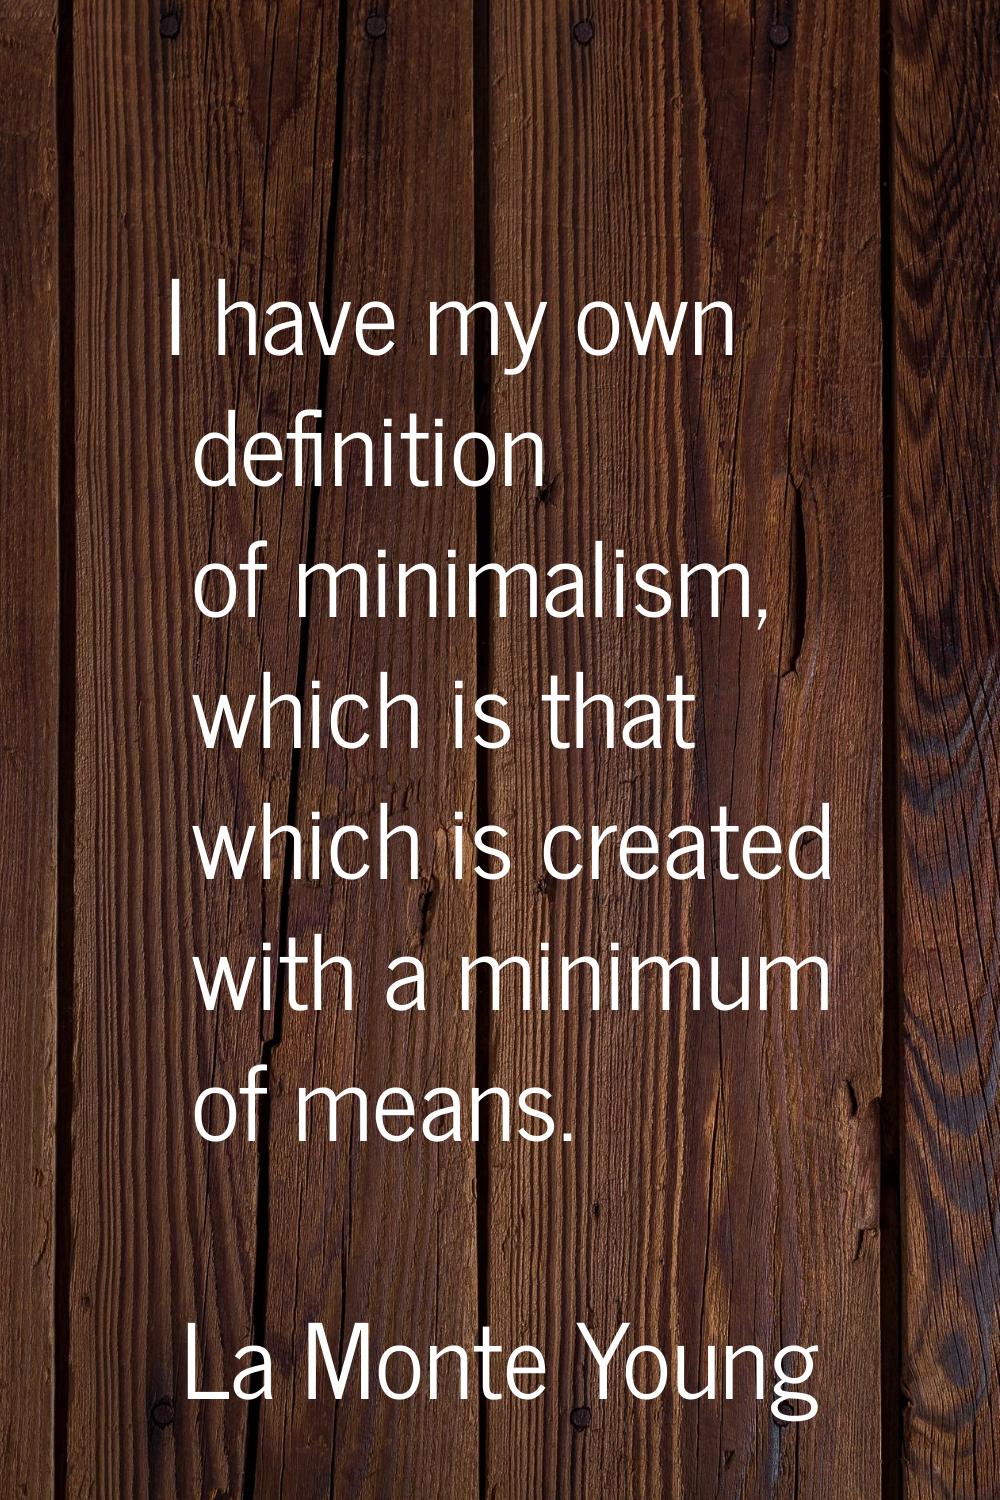 I have my own definition of minimalism, which is that which is created with a minimum of means.